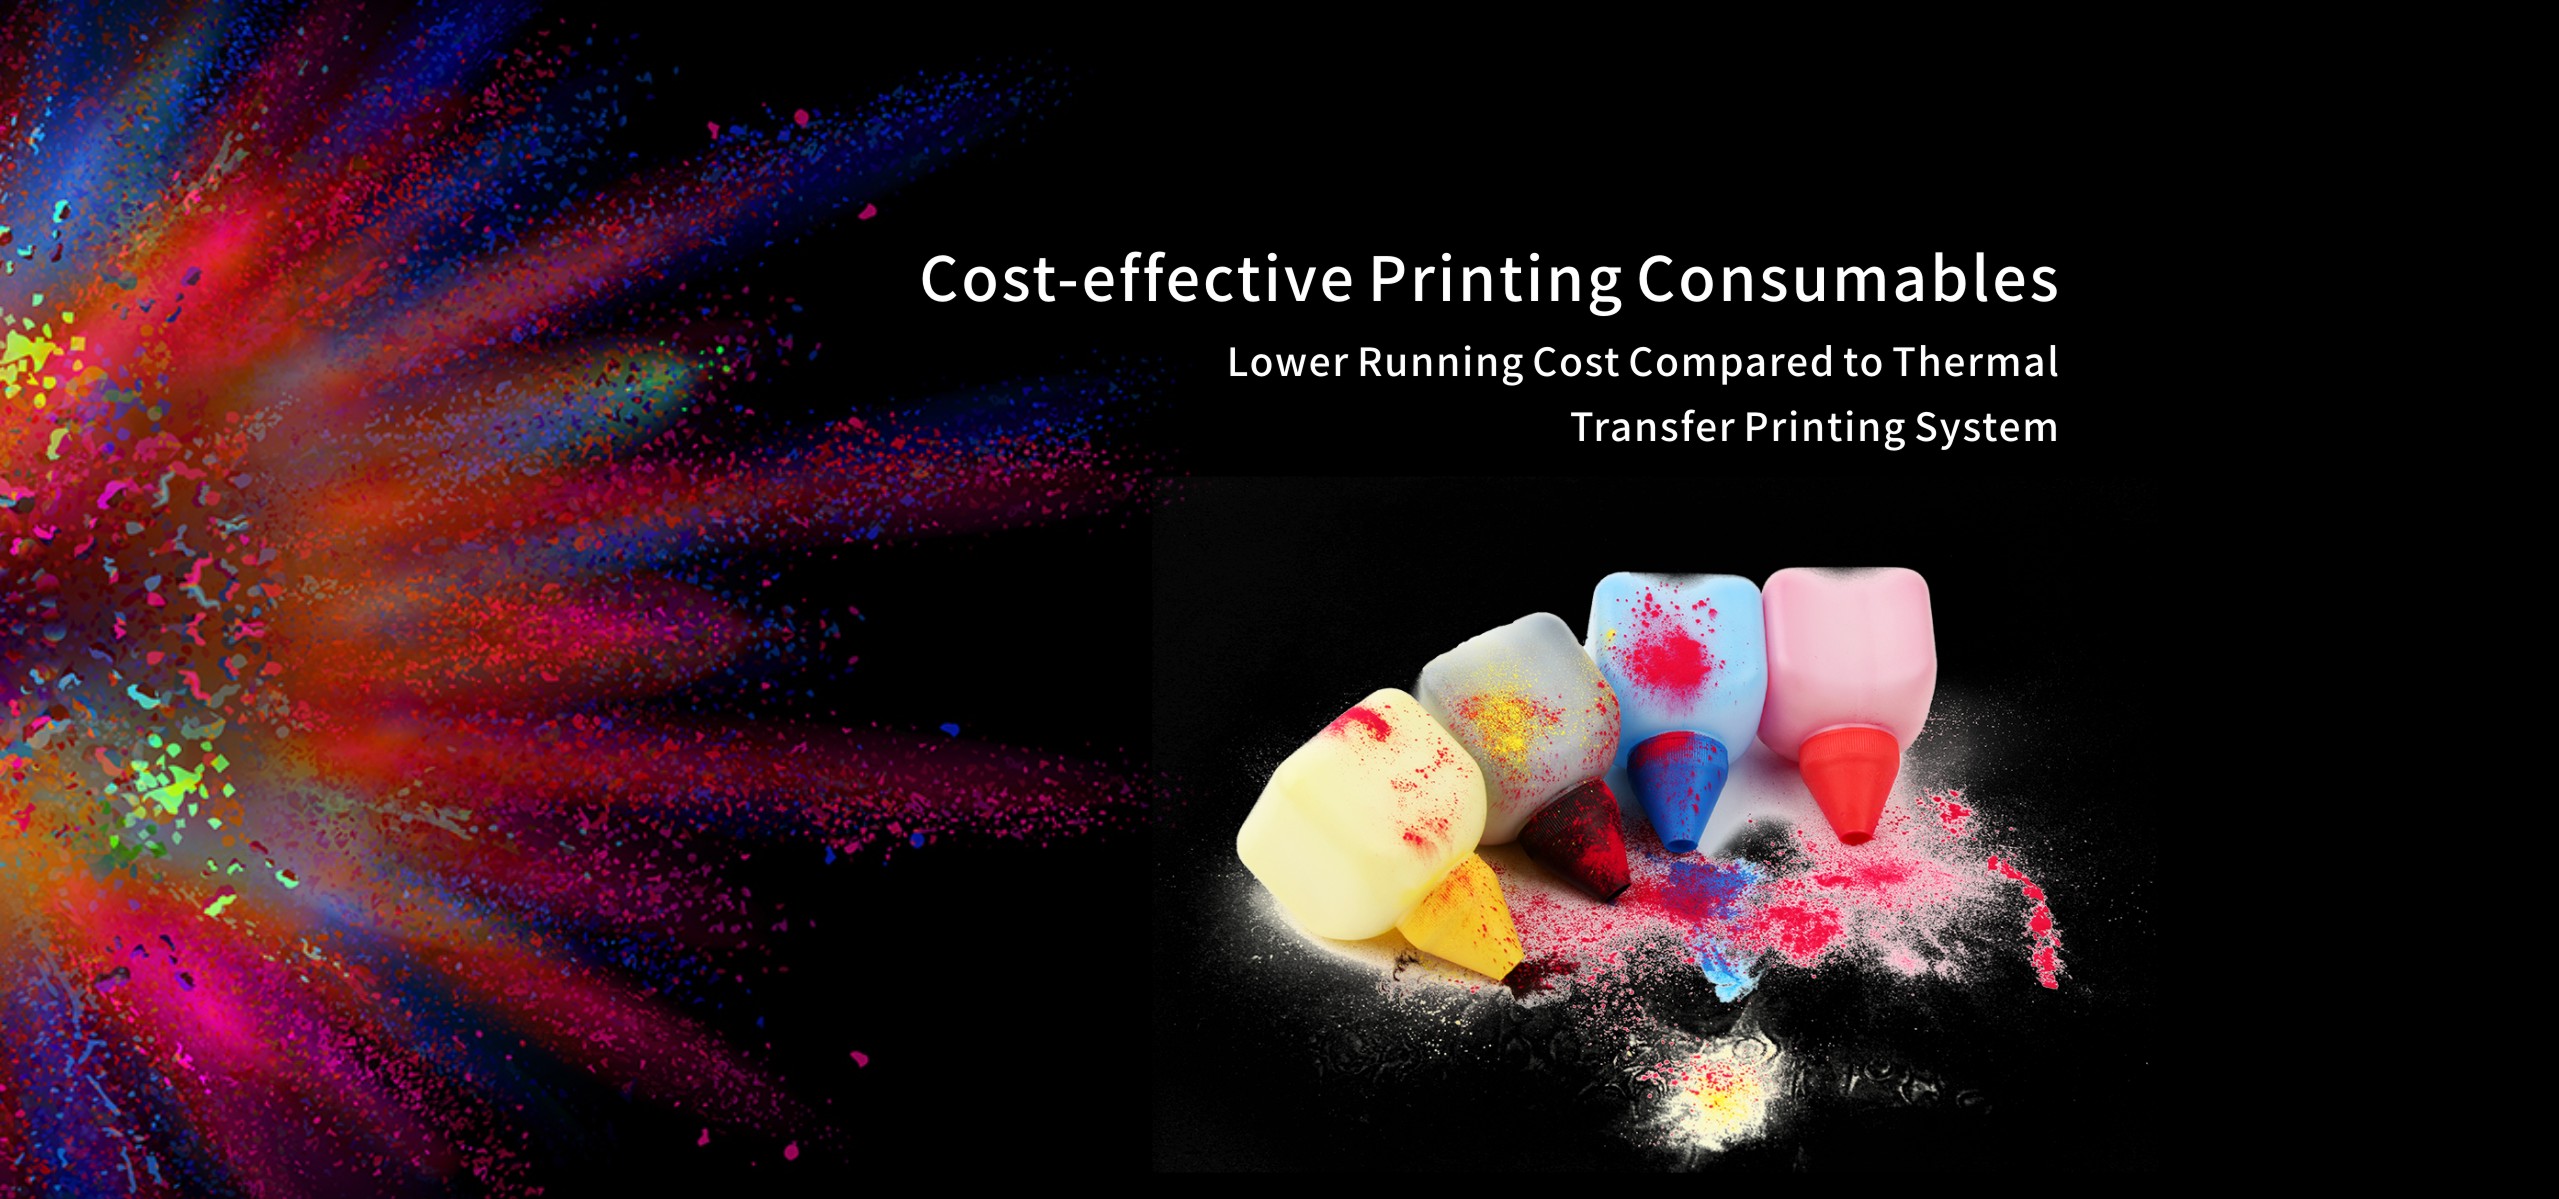 Cost-effective Printing Consumables